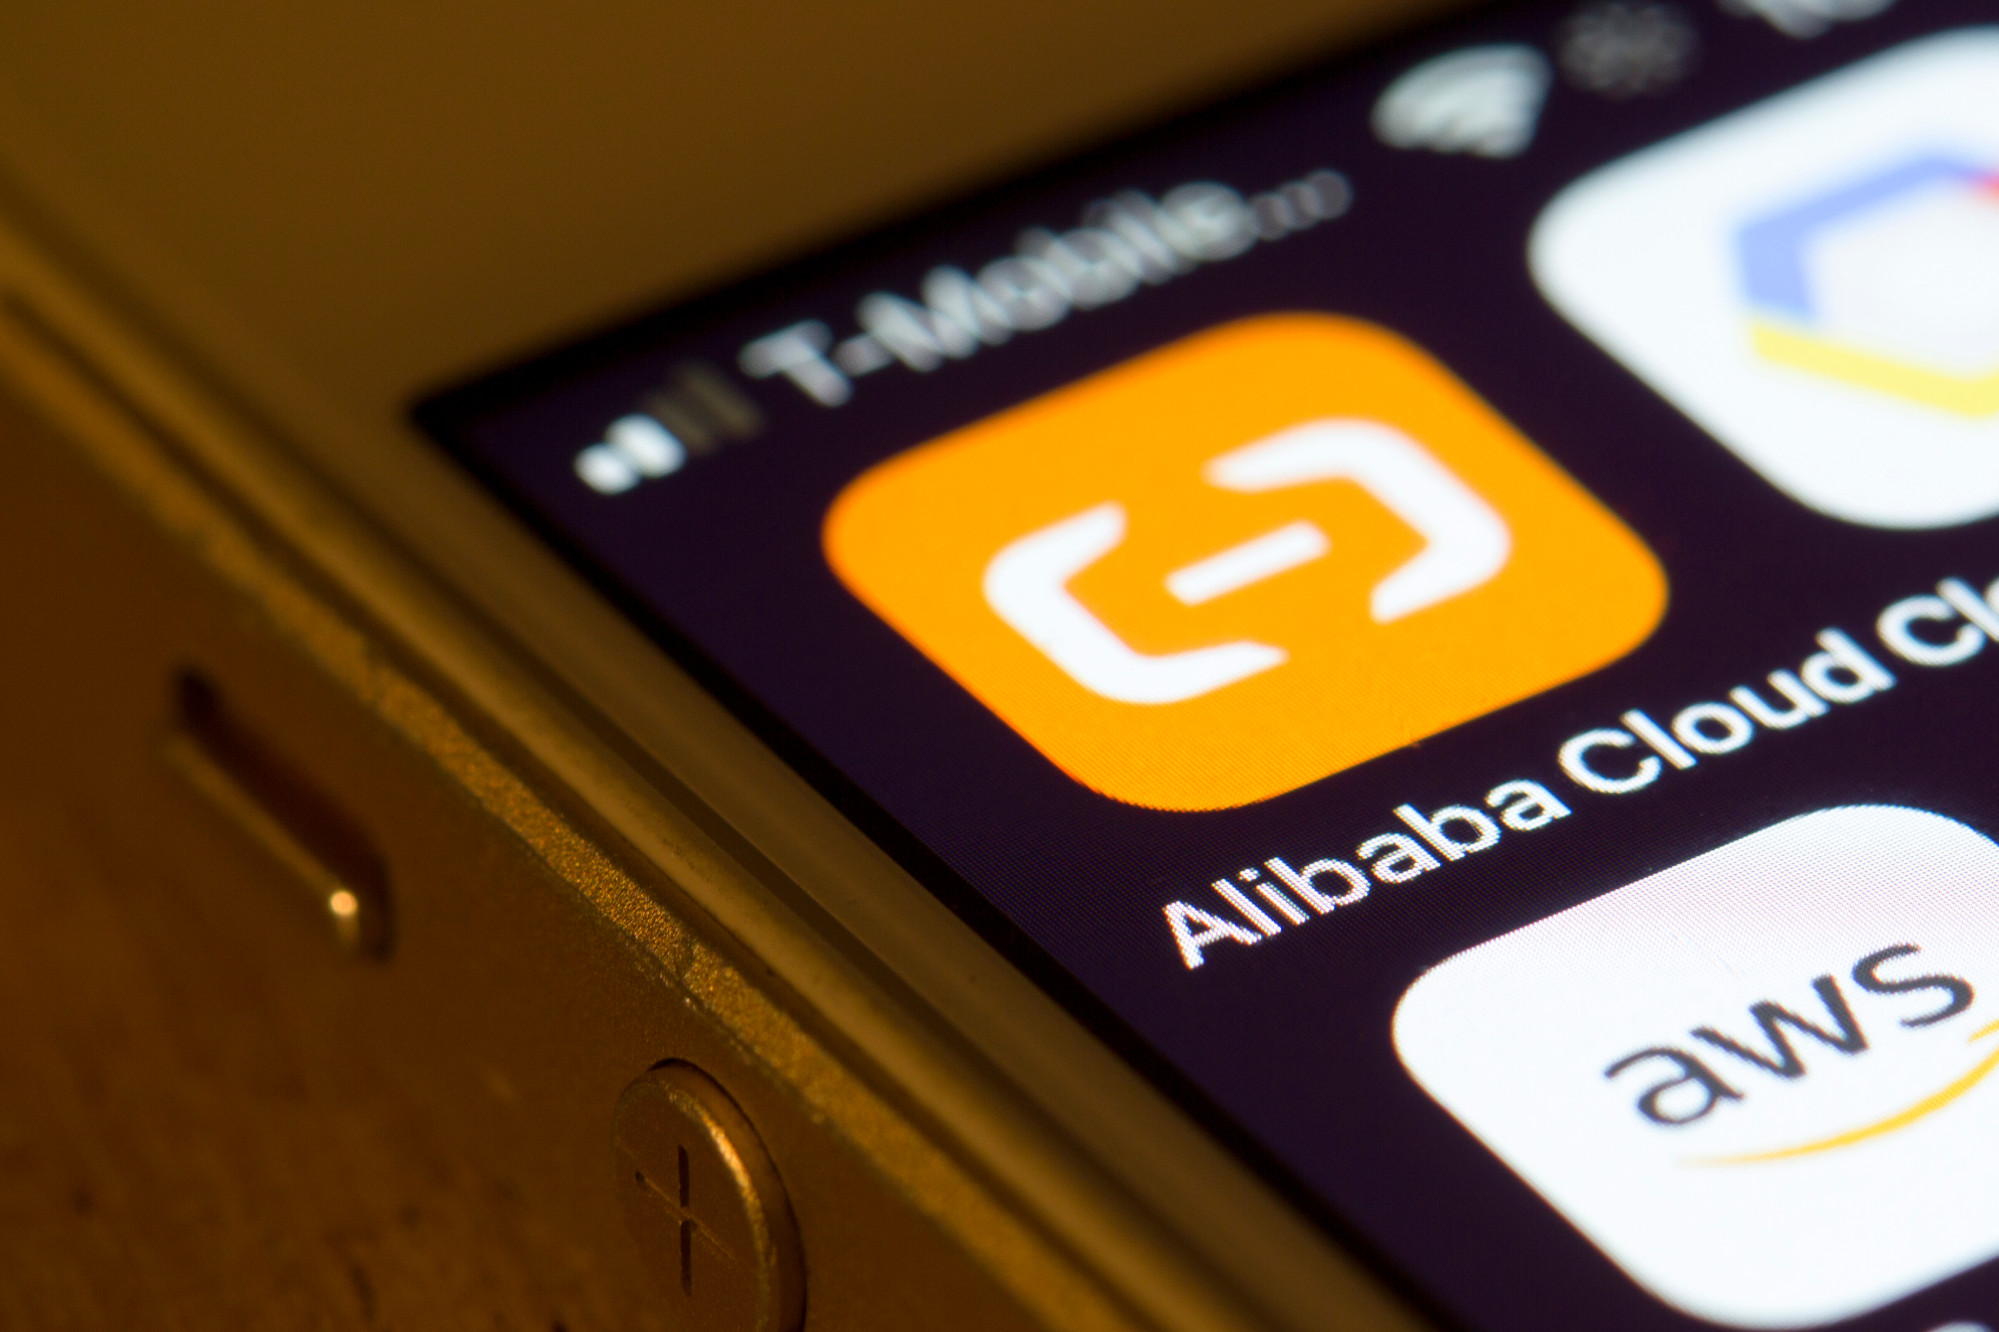 Alibaba Cloud’s mobile app icon is seen displayed on a smartphone on April 1, 2020. Photo: Shutterstock